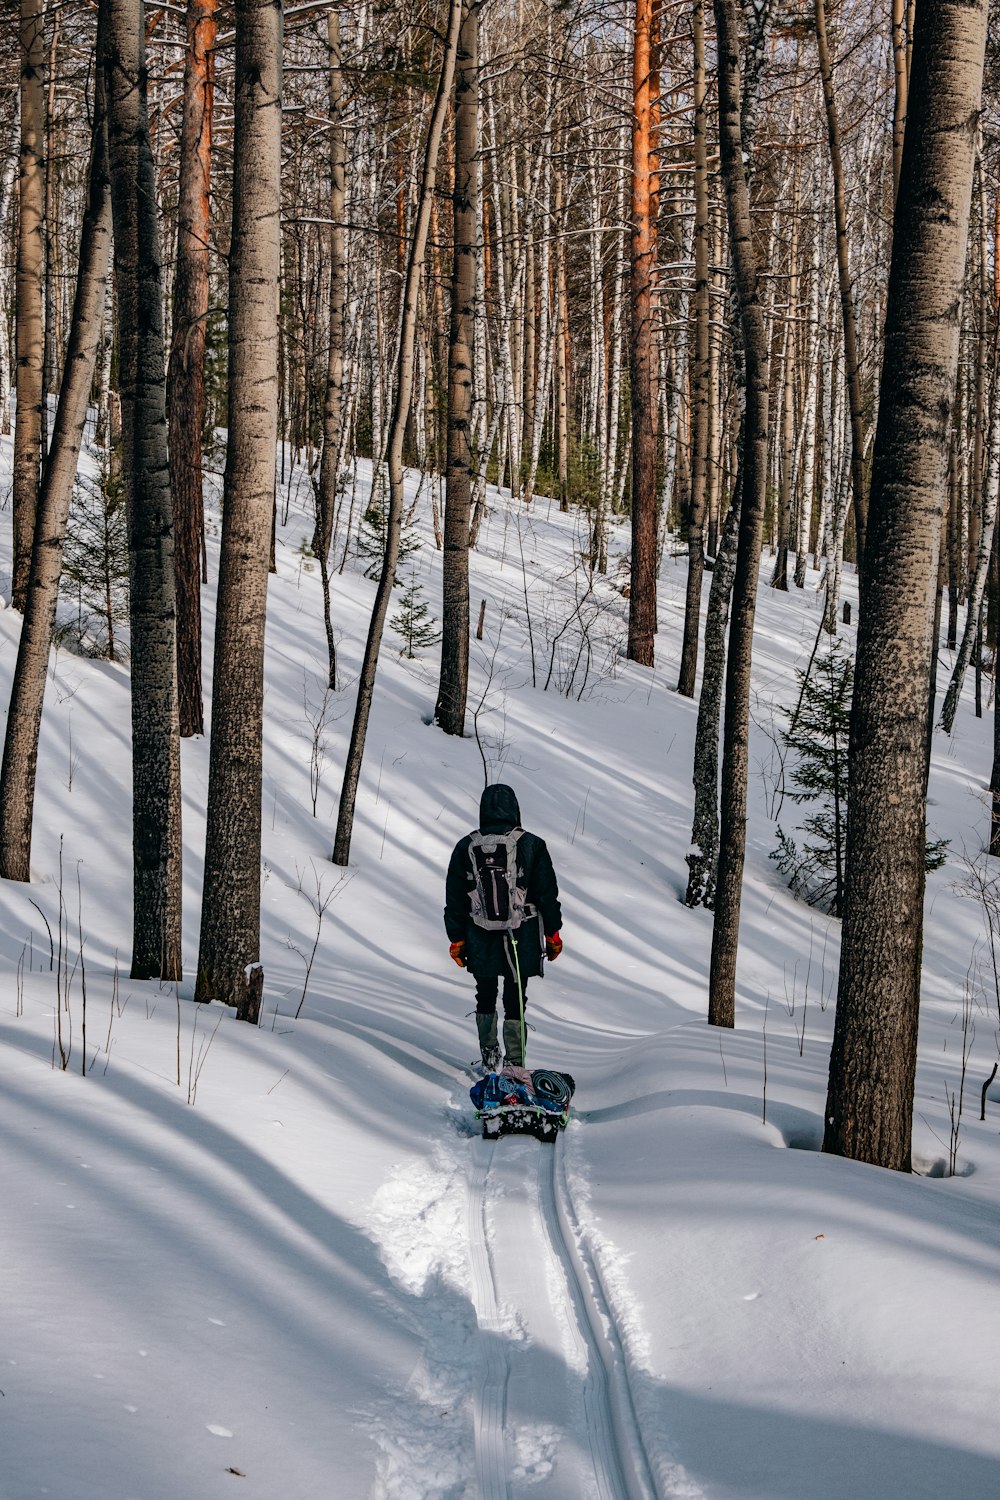 a man riding a snowboard down a snow covered forest